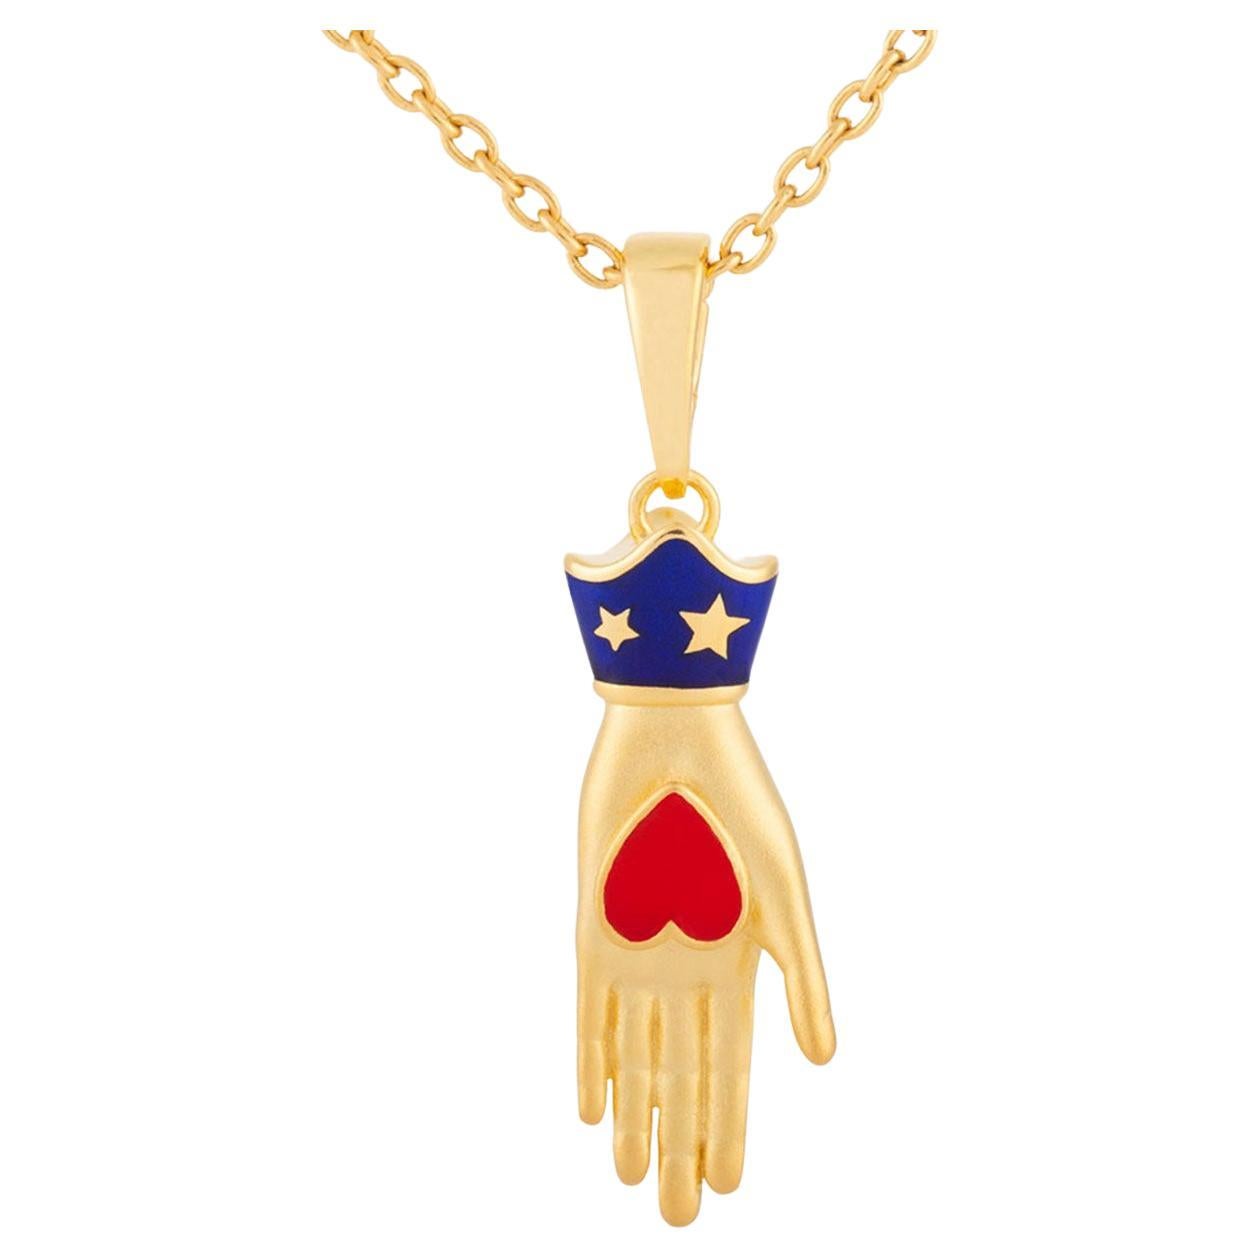 Naimah Heart in Hand Milagros Pendant Necklace, Gold, Red Enamel For Sale